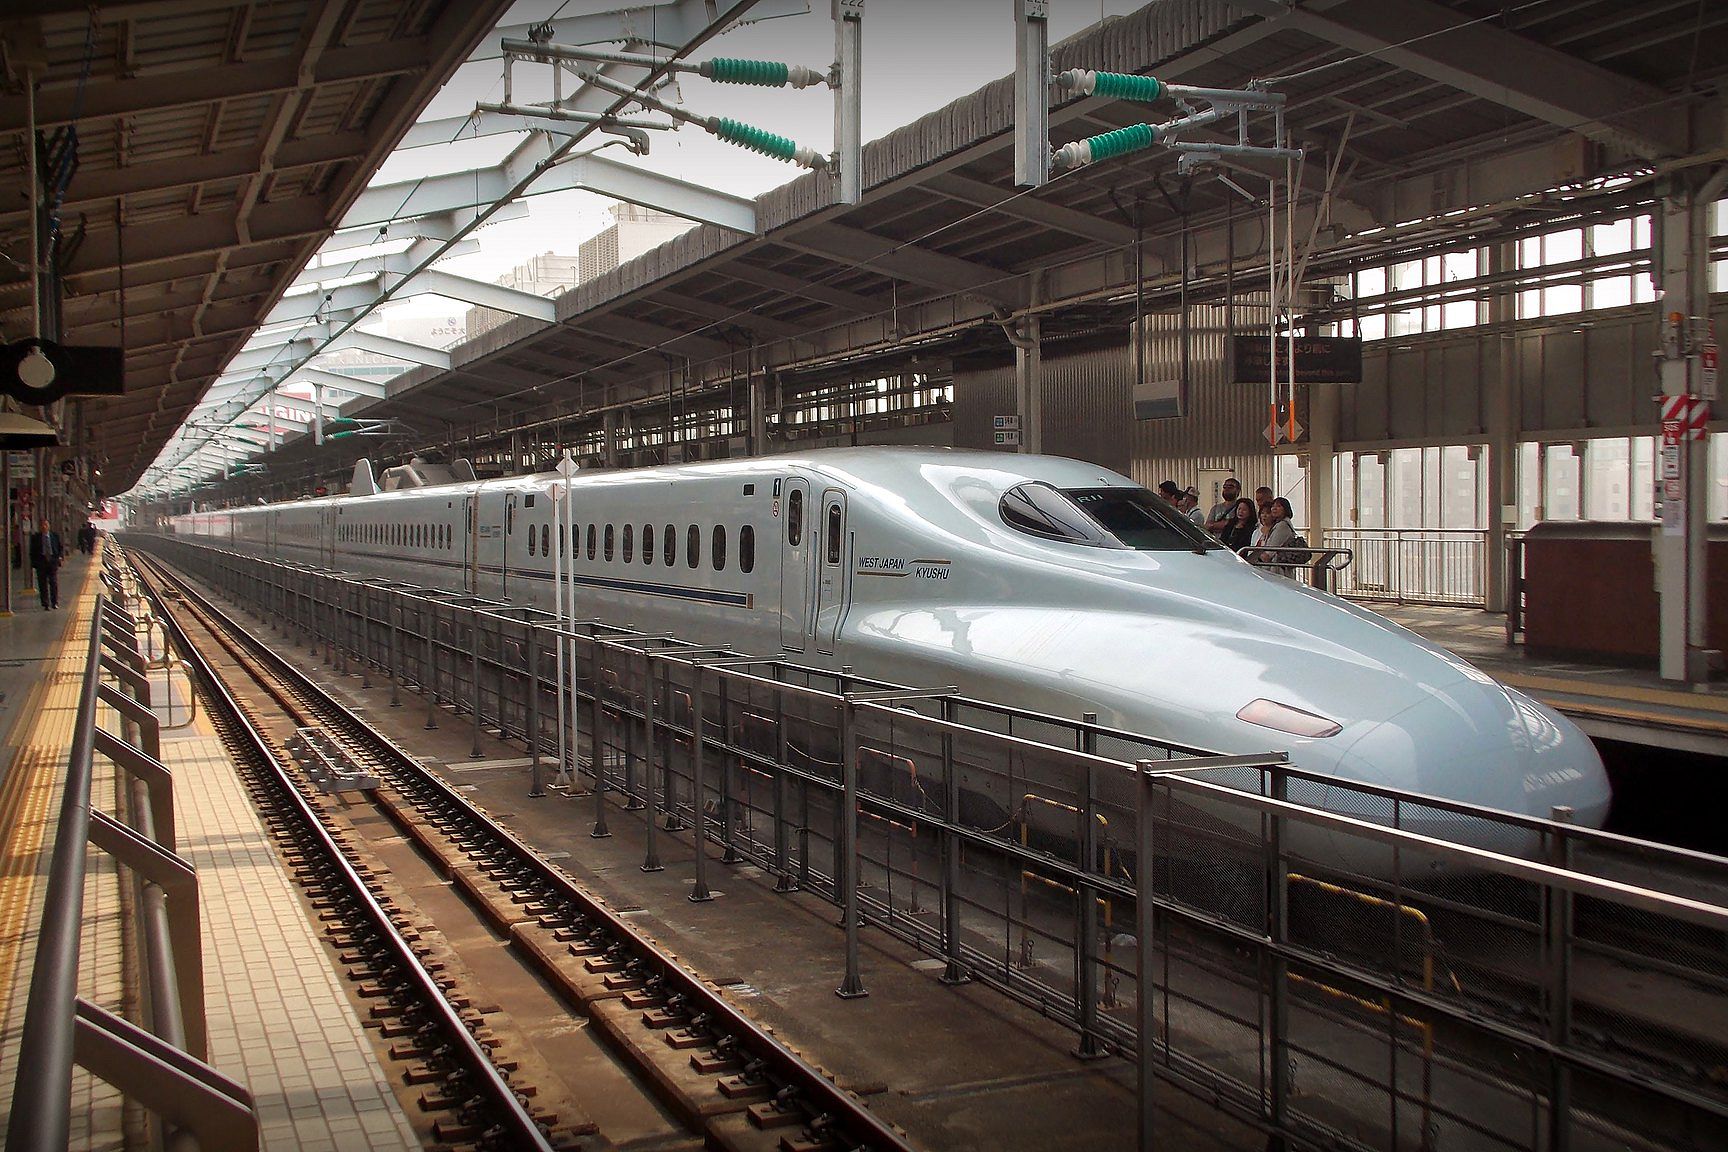 New Proposal Wants to Reduce Speed of High-Speed Train to Save $33bn - Saigoneer